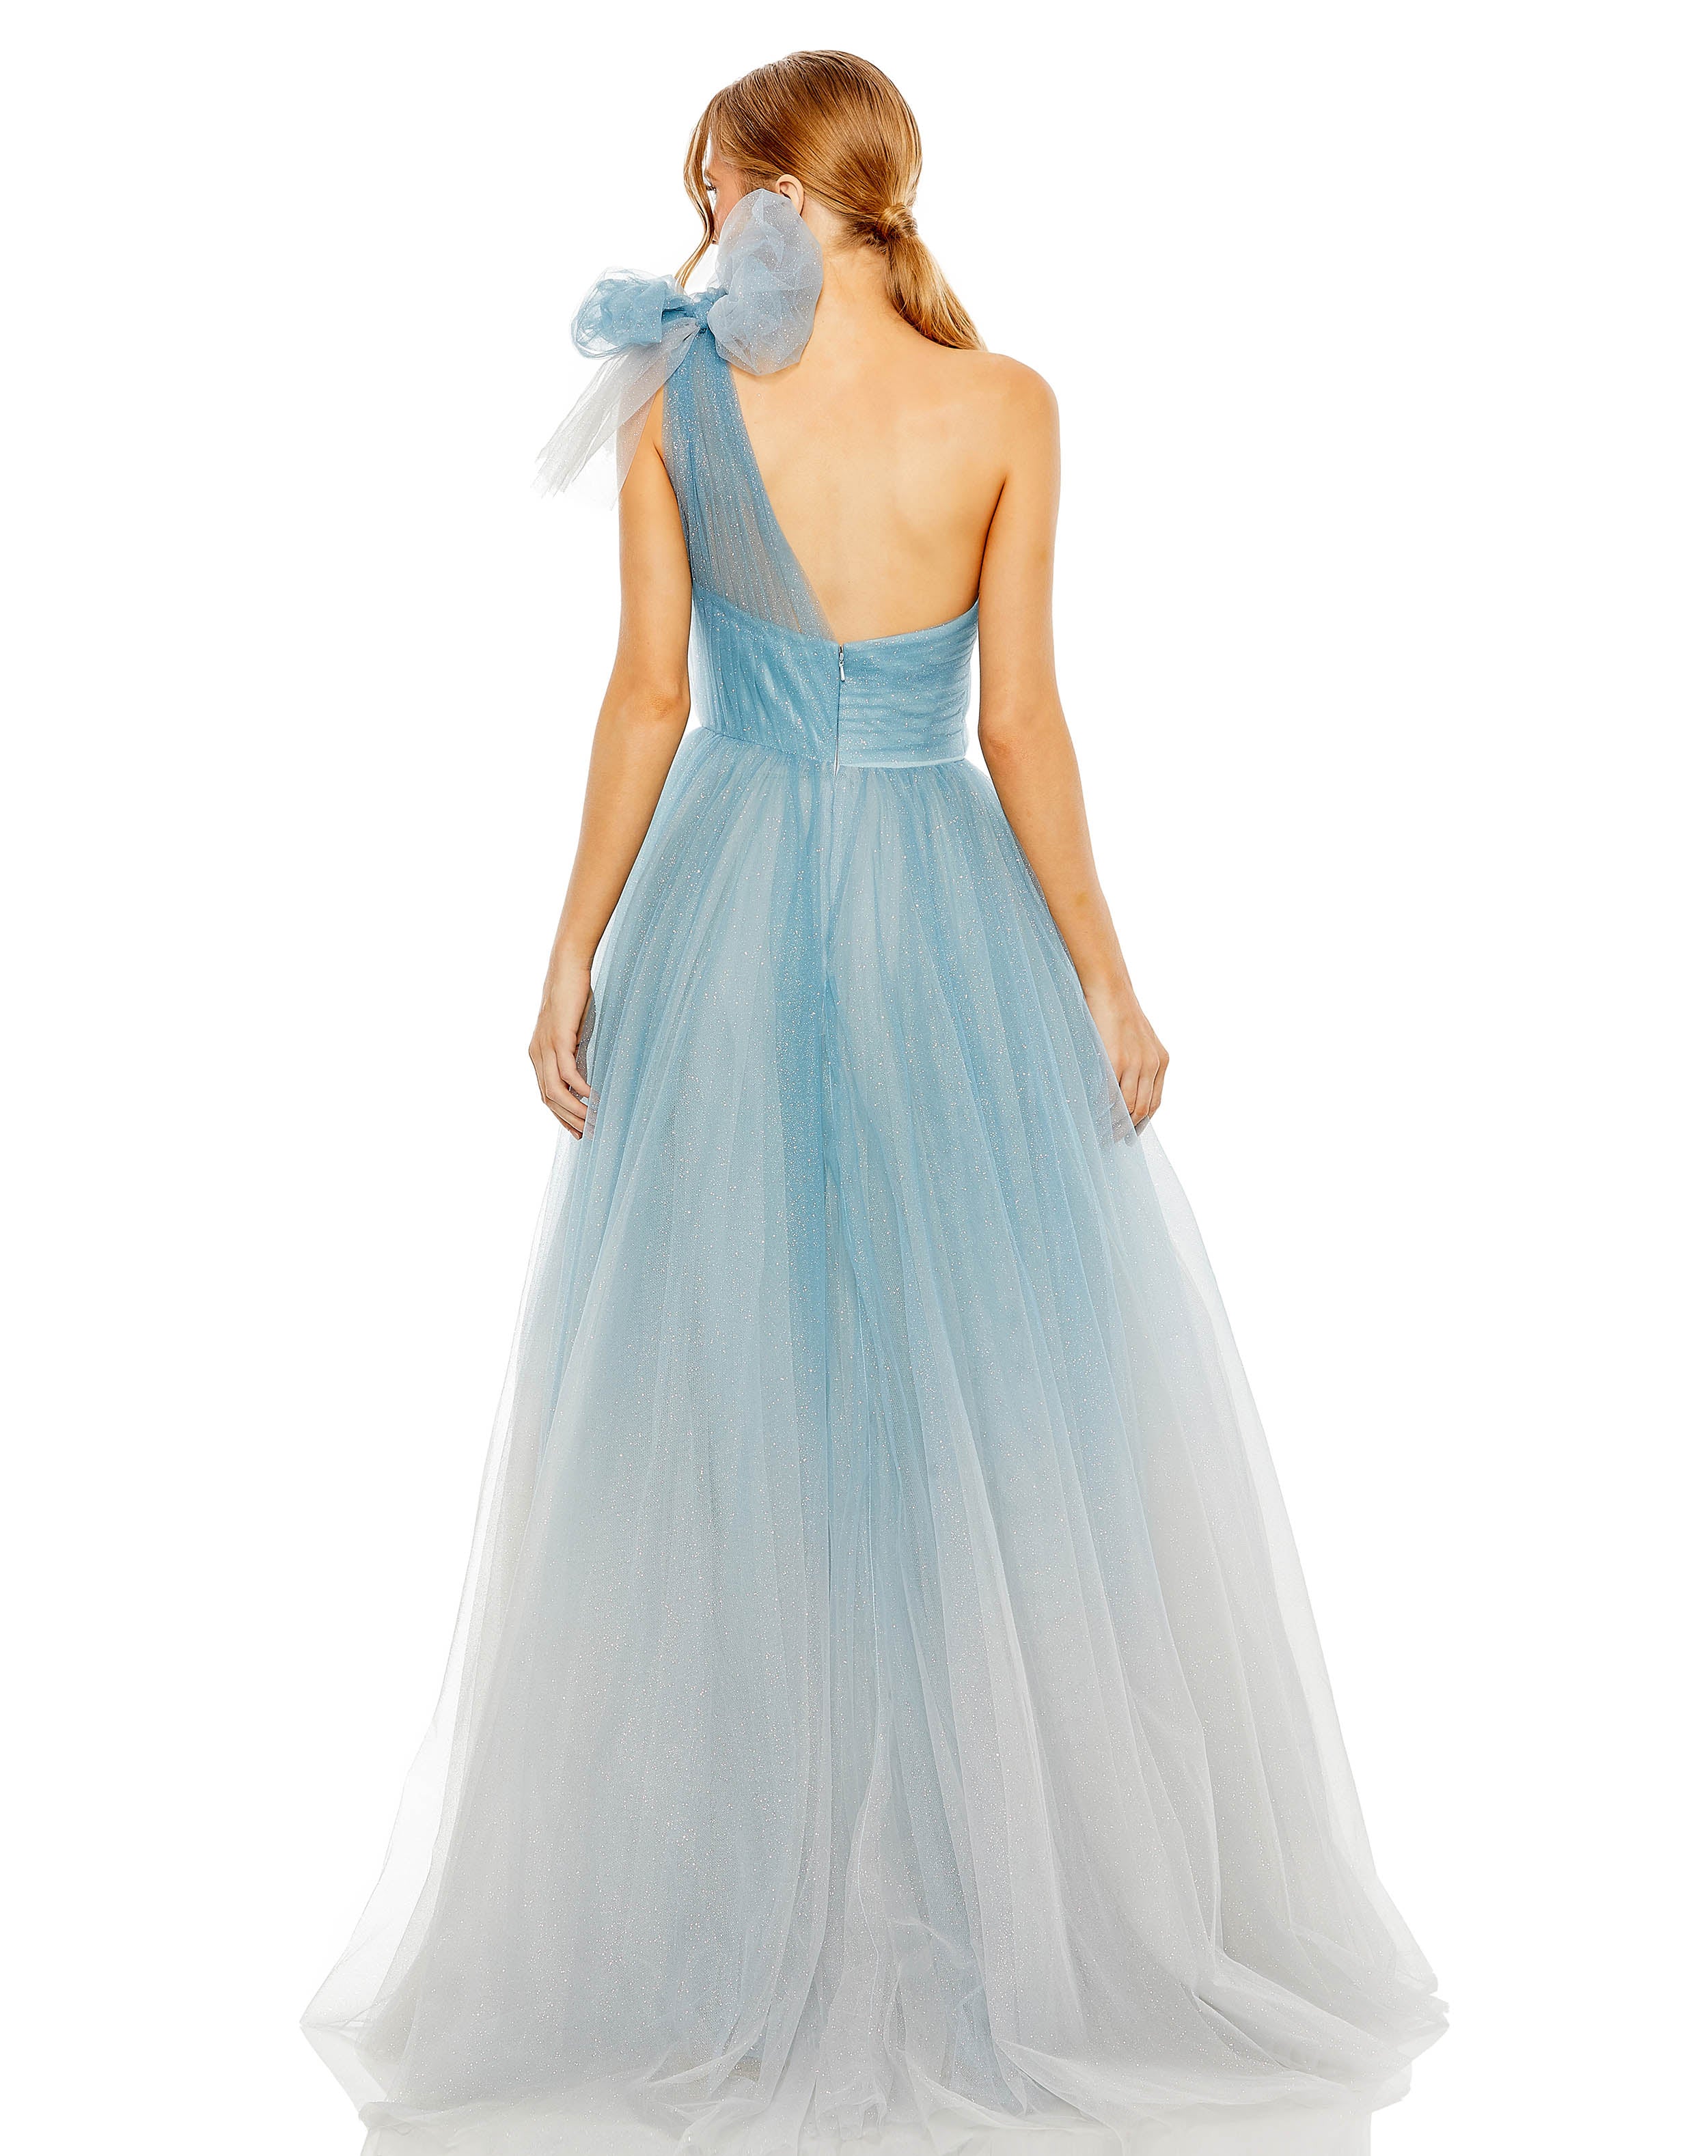 Glitter One-Shoulder Ombre Gown with Bow